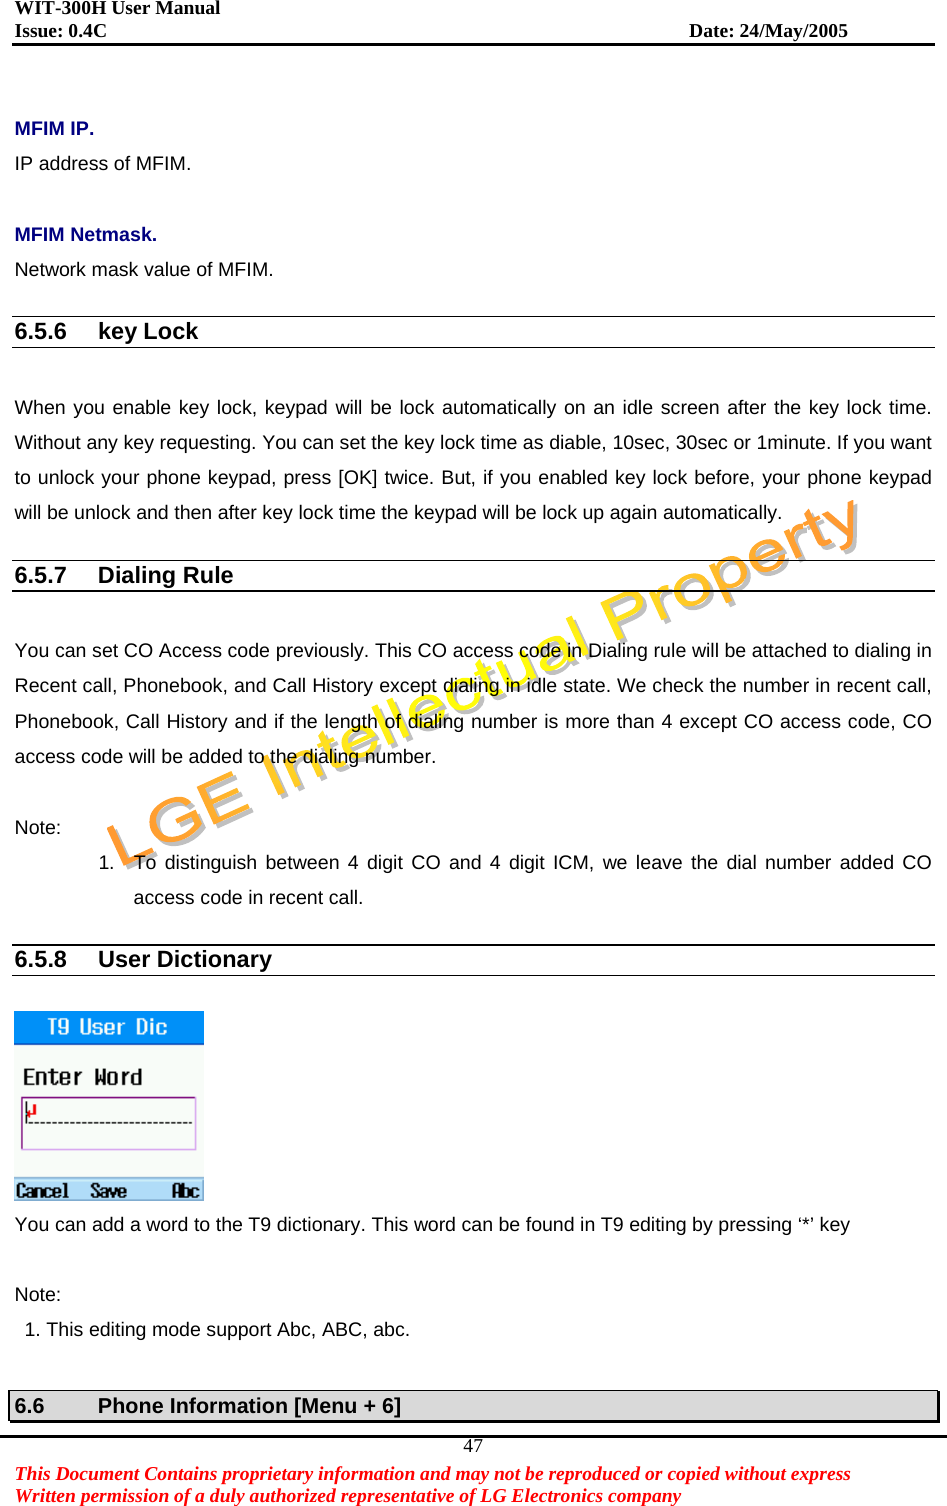 WIT-300H User Manual Issue: 0.4C                           Date: 24/May/2005   This Document Contains proprietary information and may not be reproduced or copied without express   Written permission of a duly authorized representative of LG Electronics company 47 MFIM IP. IP address of MFIM.    MFIM Netmask. Network mask value of MFIM.    6.5.6 key Lock  When you enable key lock, keypad will be lock automatically on an idle screen after the key lock time. Without any key requesting. You can set the key lock time as diable, 10sec, 30sec or 1minute. If you want to unlock your phone keypad, press [OK] twice. But, if you enabled key lock before, your phone keypad will be unlock and then after key lock time the keypad will be lock up again automatically.  6.5.7 Dialing Rule  You can set CO Access code previously. This CO access code in Dialing rule will be attached to dialing in Recent call, Phonebook, and Call History except dialing in idle state. We check the number in recent call, Phonebook, Call History and if the length of dialing number is more than 4 except CO access code, CO access code will be added to the dialing number.  Note: 1.  To distinguish between 4 digit CO and 4 digit ICM, we leave the dial number added CO access code in recent call.  6.5.8 User Dictionary   You can add a word to the T9 dictionary. This word can be found in T9 editing by pressing ‘*’ key  Note:   1. This editing mode support Abc, ABC, abc.  6.6  Phone Information [Menu + 6] 